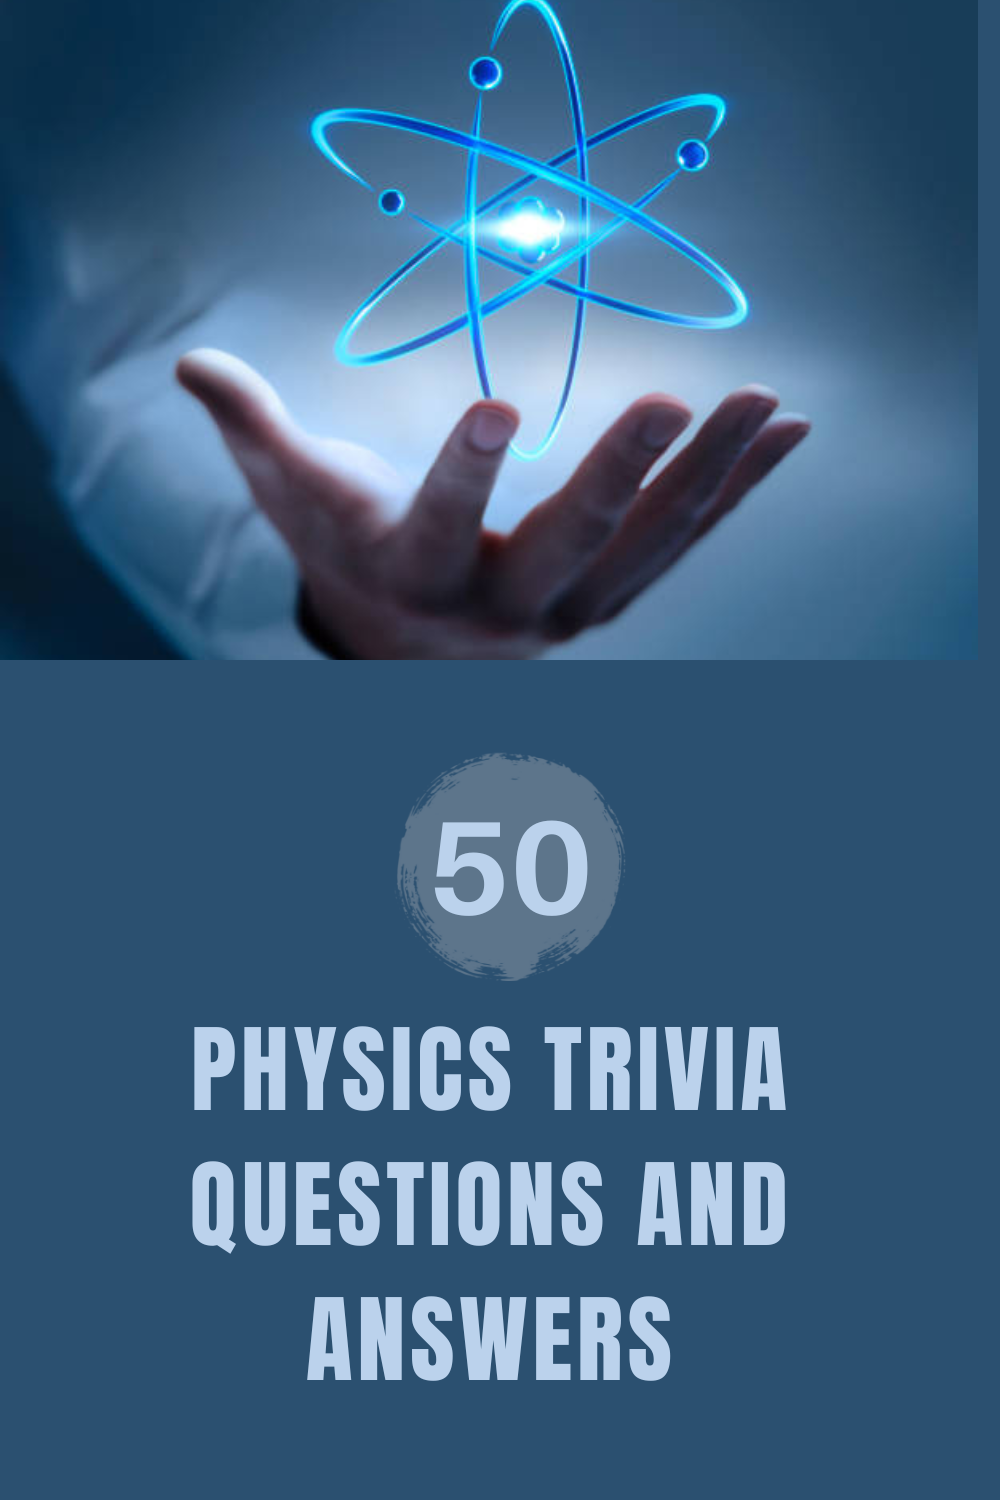 50 Physics Trivia Questions and Answers